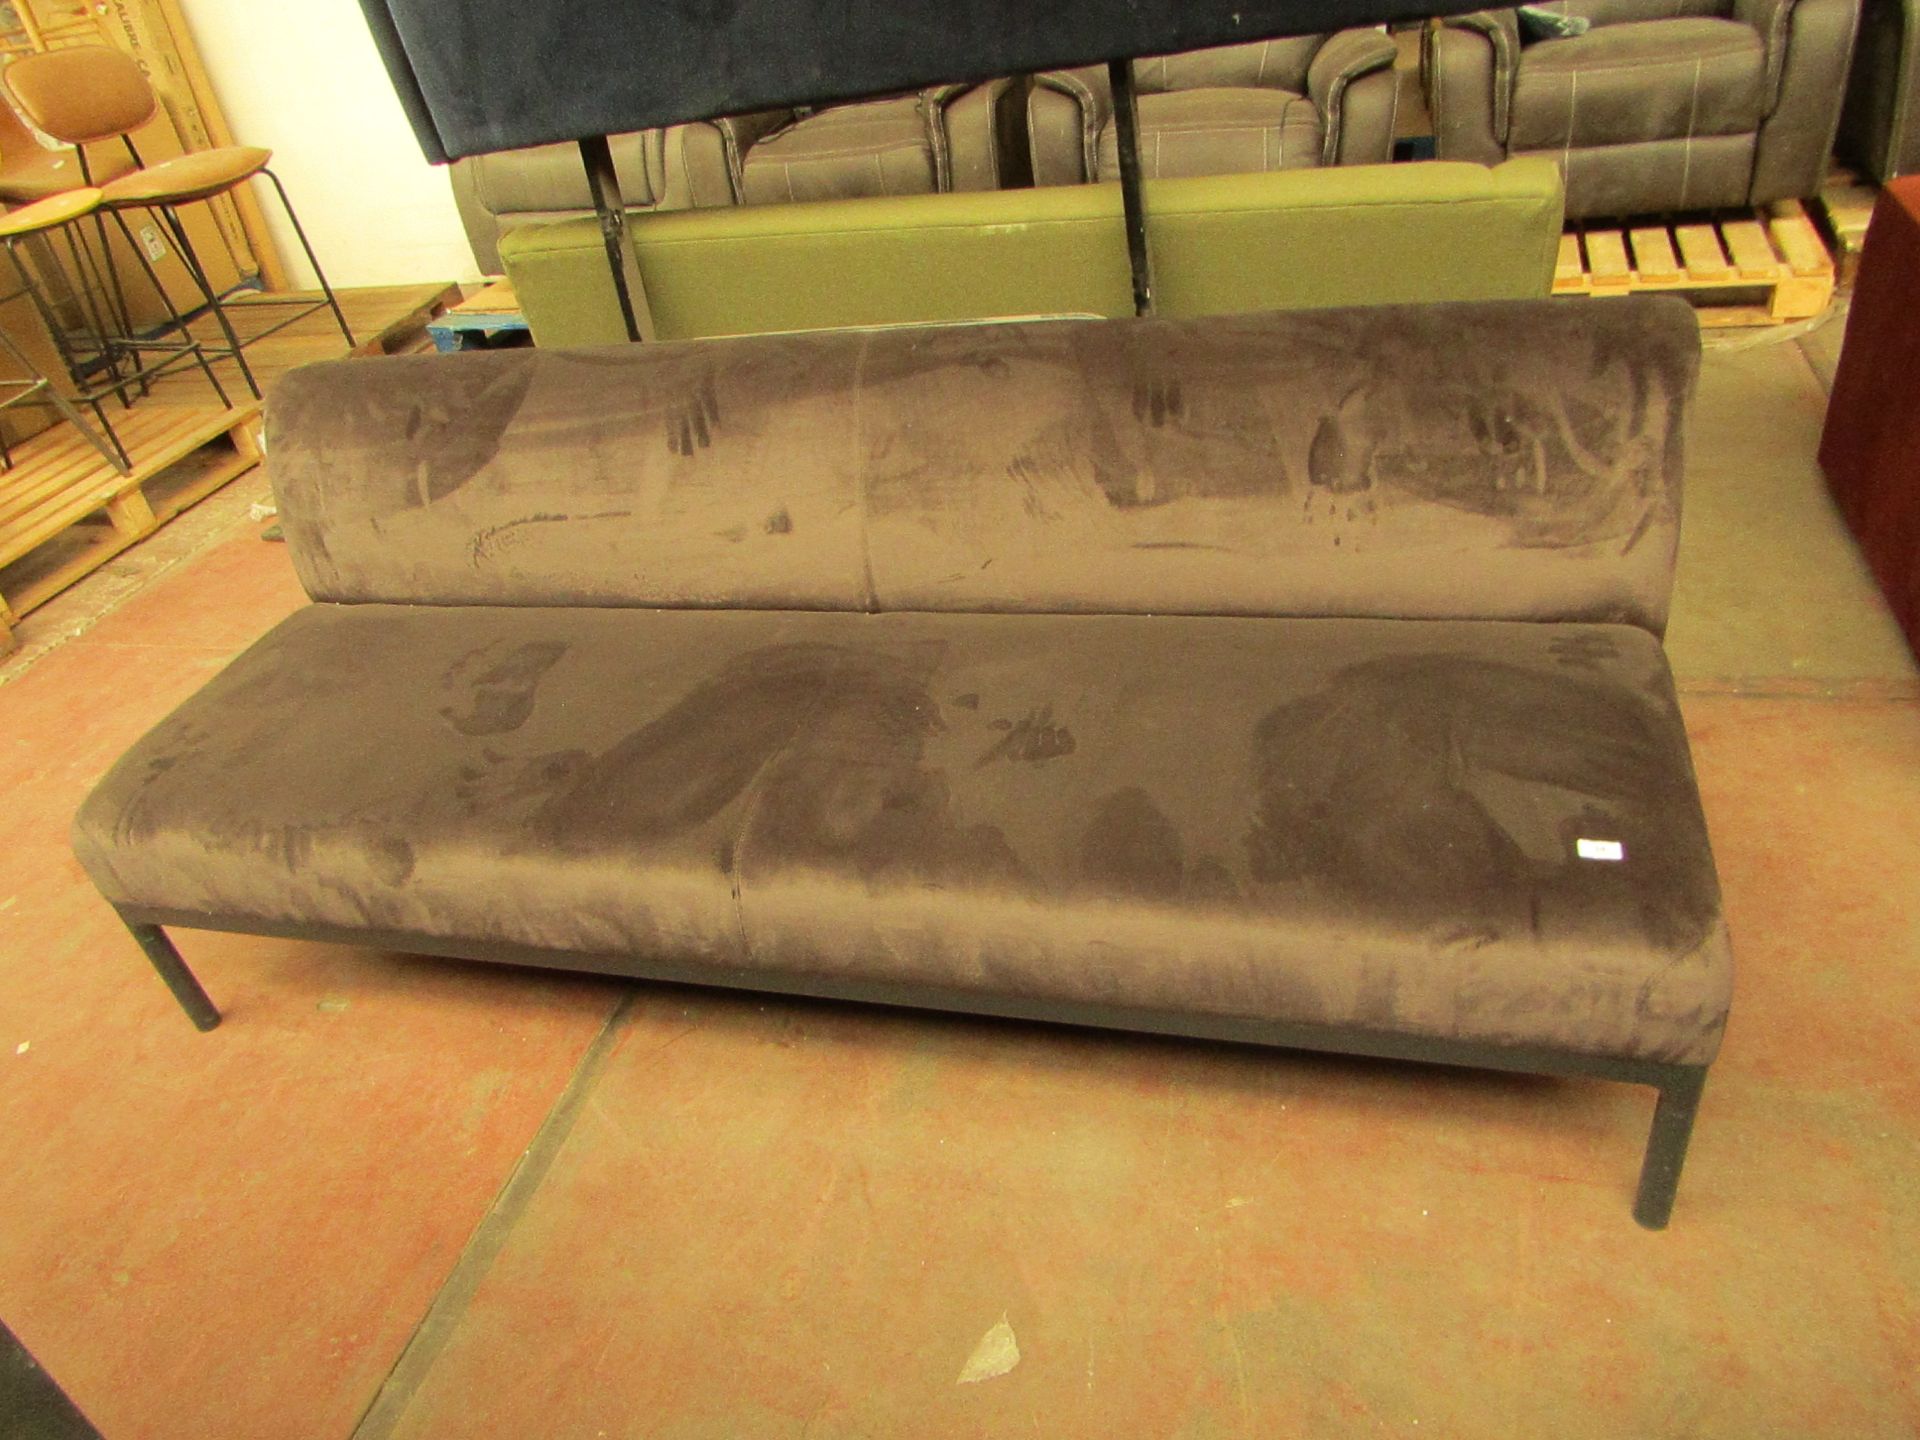 | 1x | PERASON LLOYD EDGE BENCH | SOFA CUSHION IS IN GOOD CONITION BUT THERE MAY BE SMALL MINOR